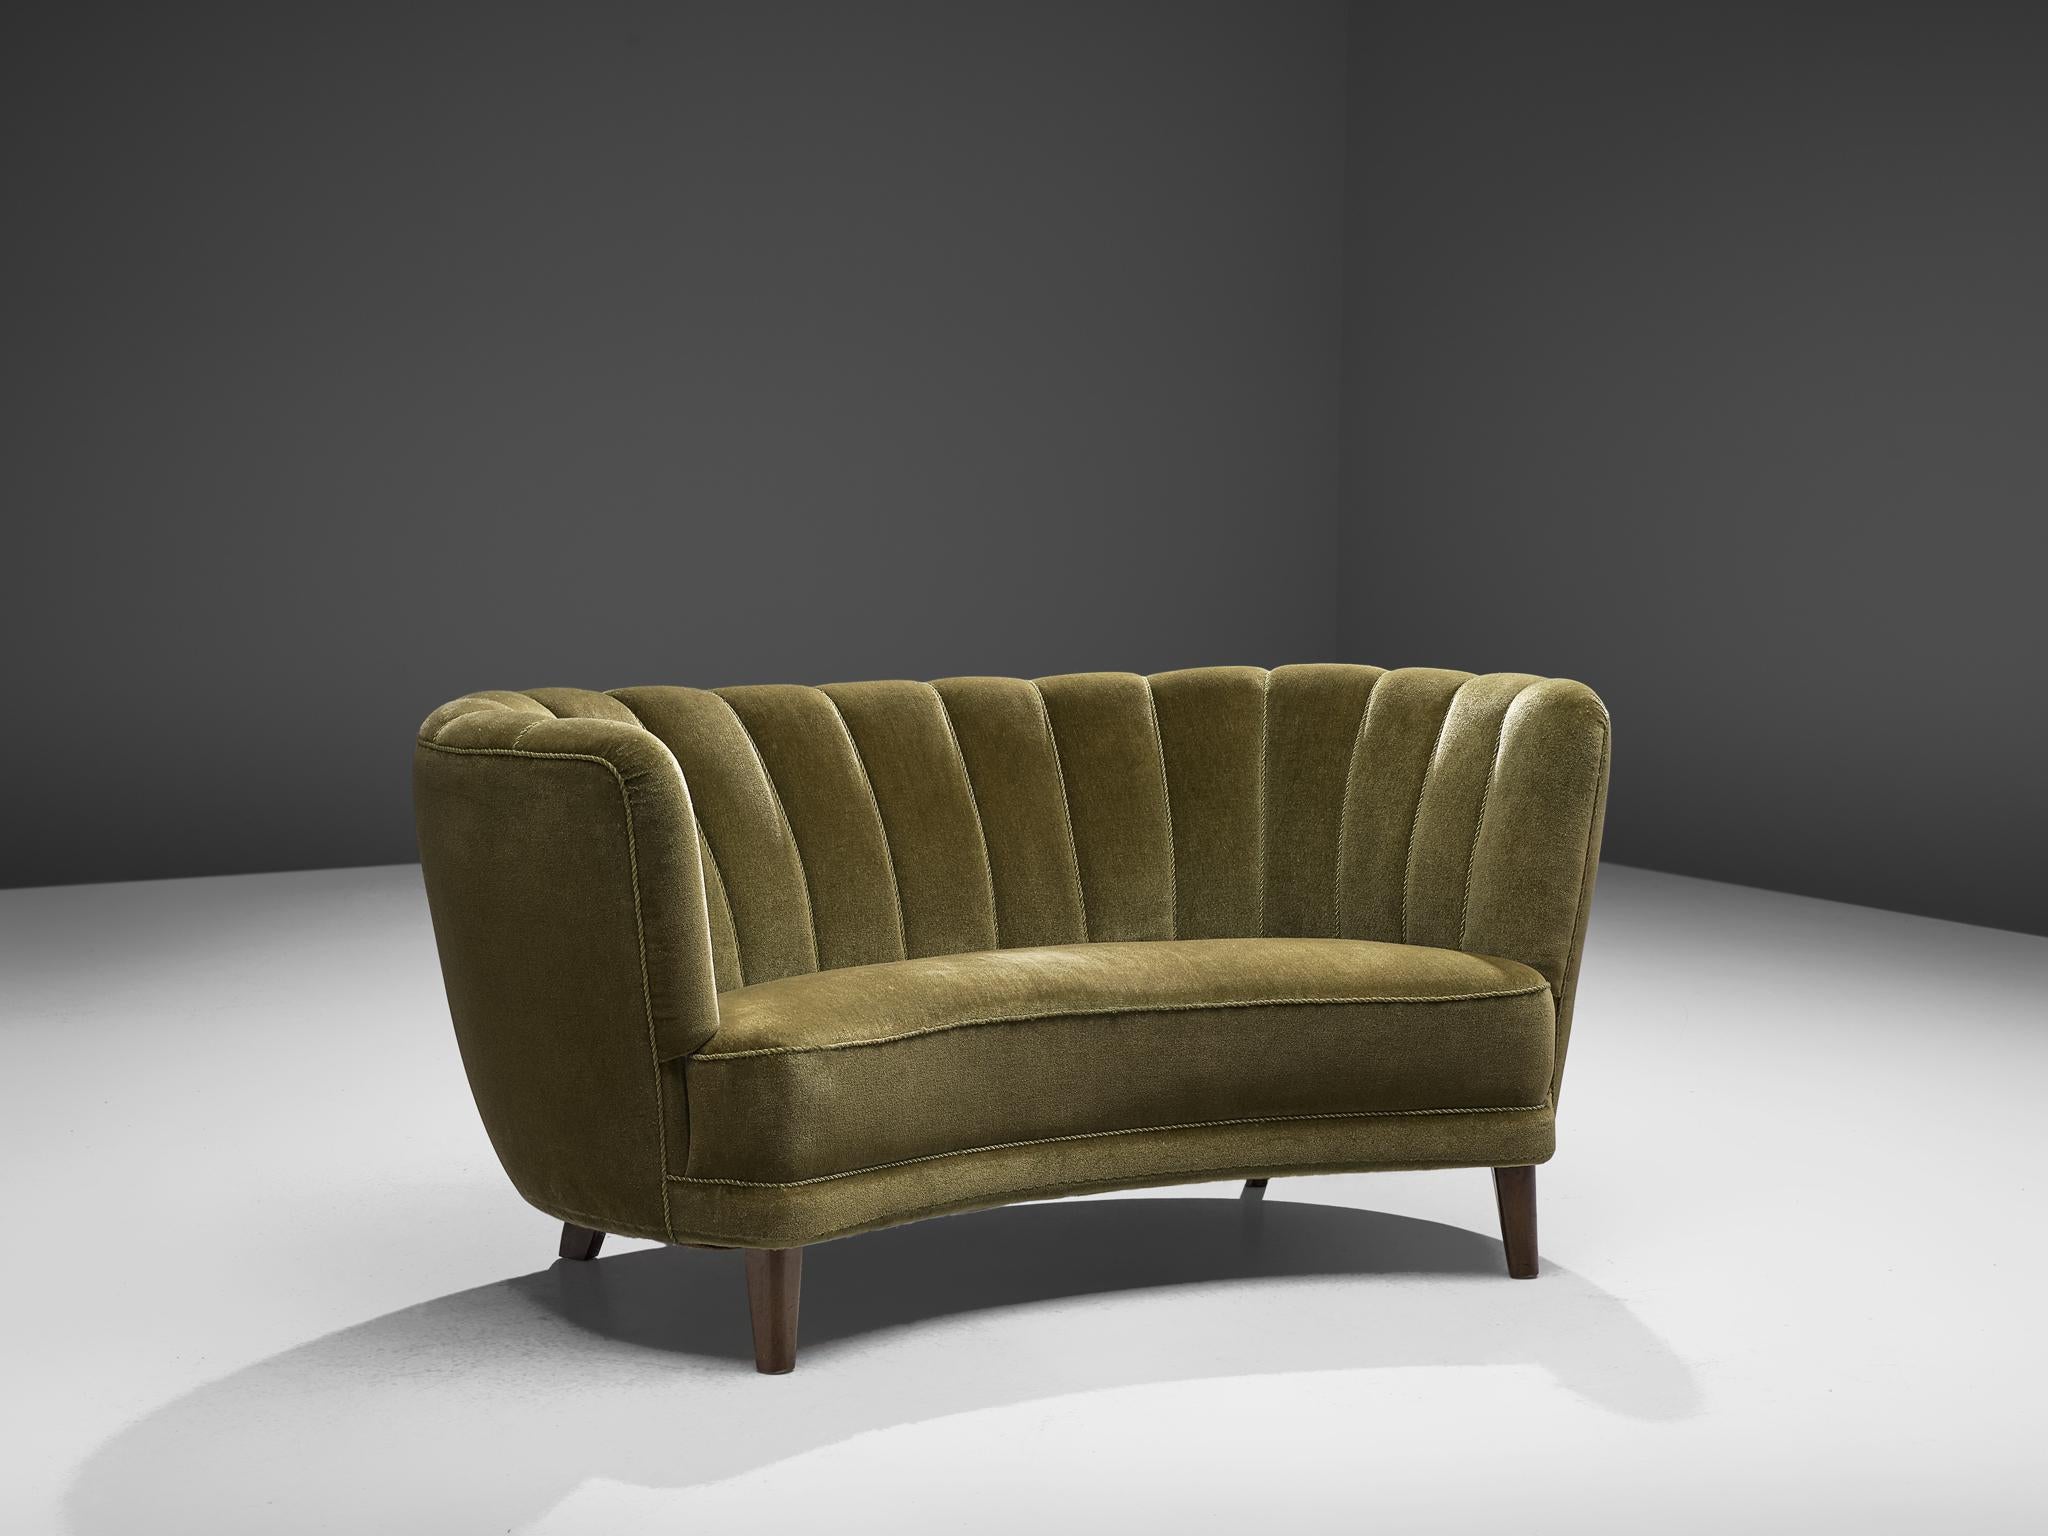 Curved settee, green fabric and oak, Denmark, 1940s

This voluptuous sofa is executed with wooden legs and a green velvet. The sofa has a high lined and curved back, while the backrest is horizontal straight and flows over into the bulky armrests.